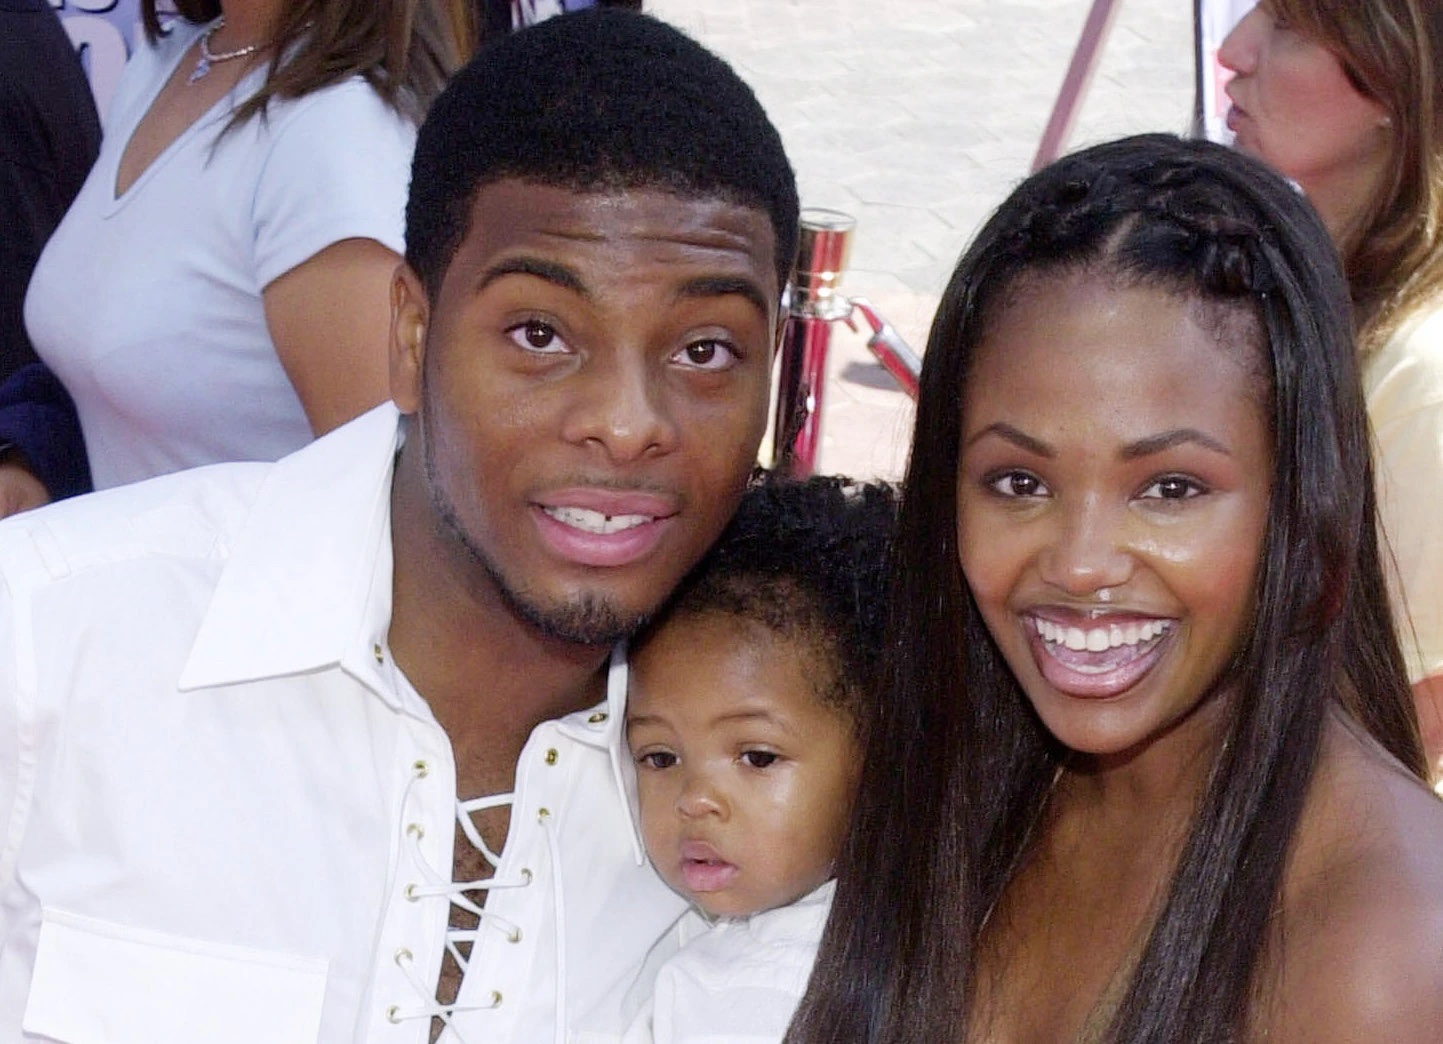 Kel Mitchell Demands Ex-Wife Pay Him $12k For ‘Abuse Of Legal System’ After Judge Sides With ‘Kenan & Kel’ Star